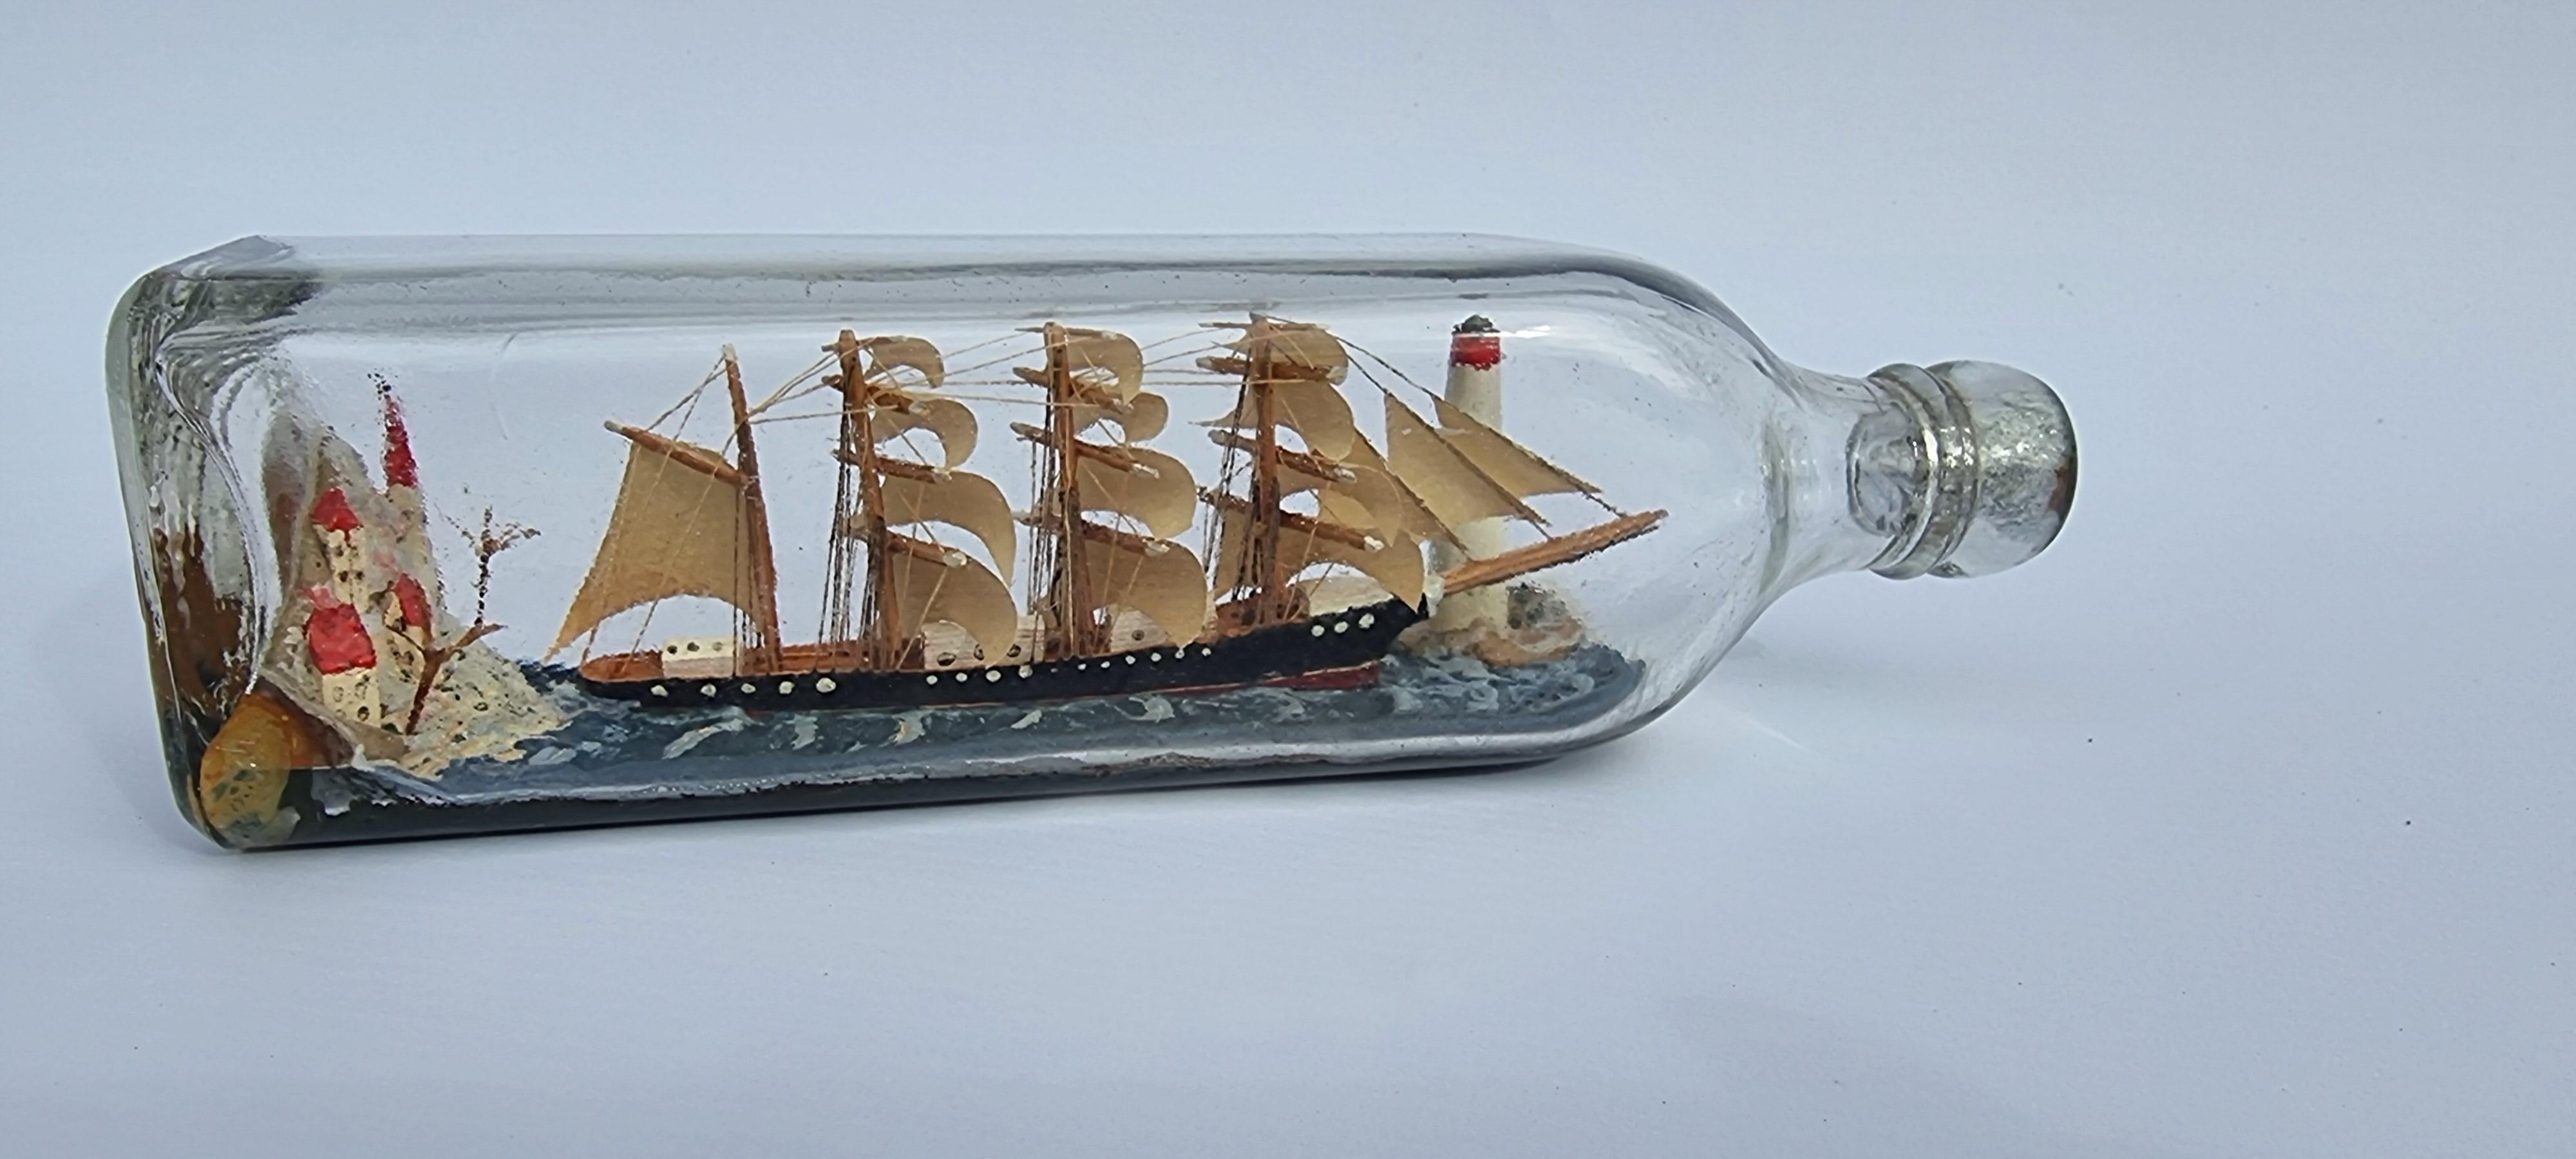 
This very good example has been hand built in a smaller sized square bottle than normally seen. It contains a large four mast 18th century ship fully rigged and with open sails leaving the shoreline which has high cliffs and buildings whilst about